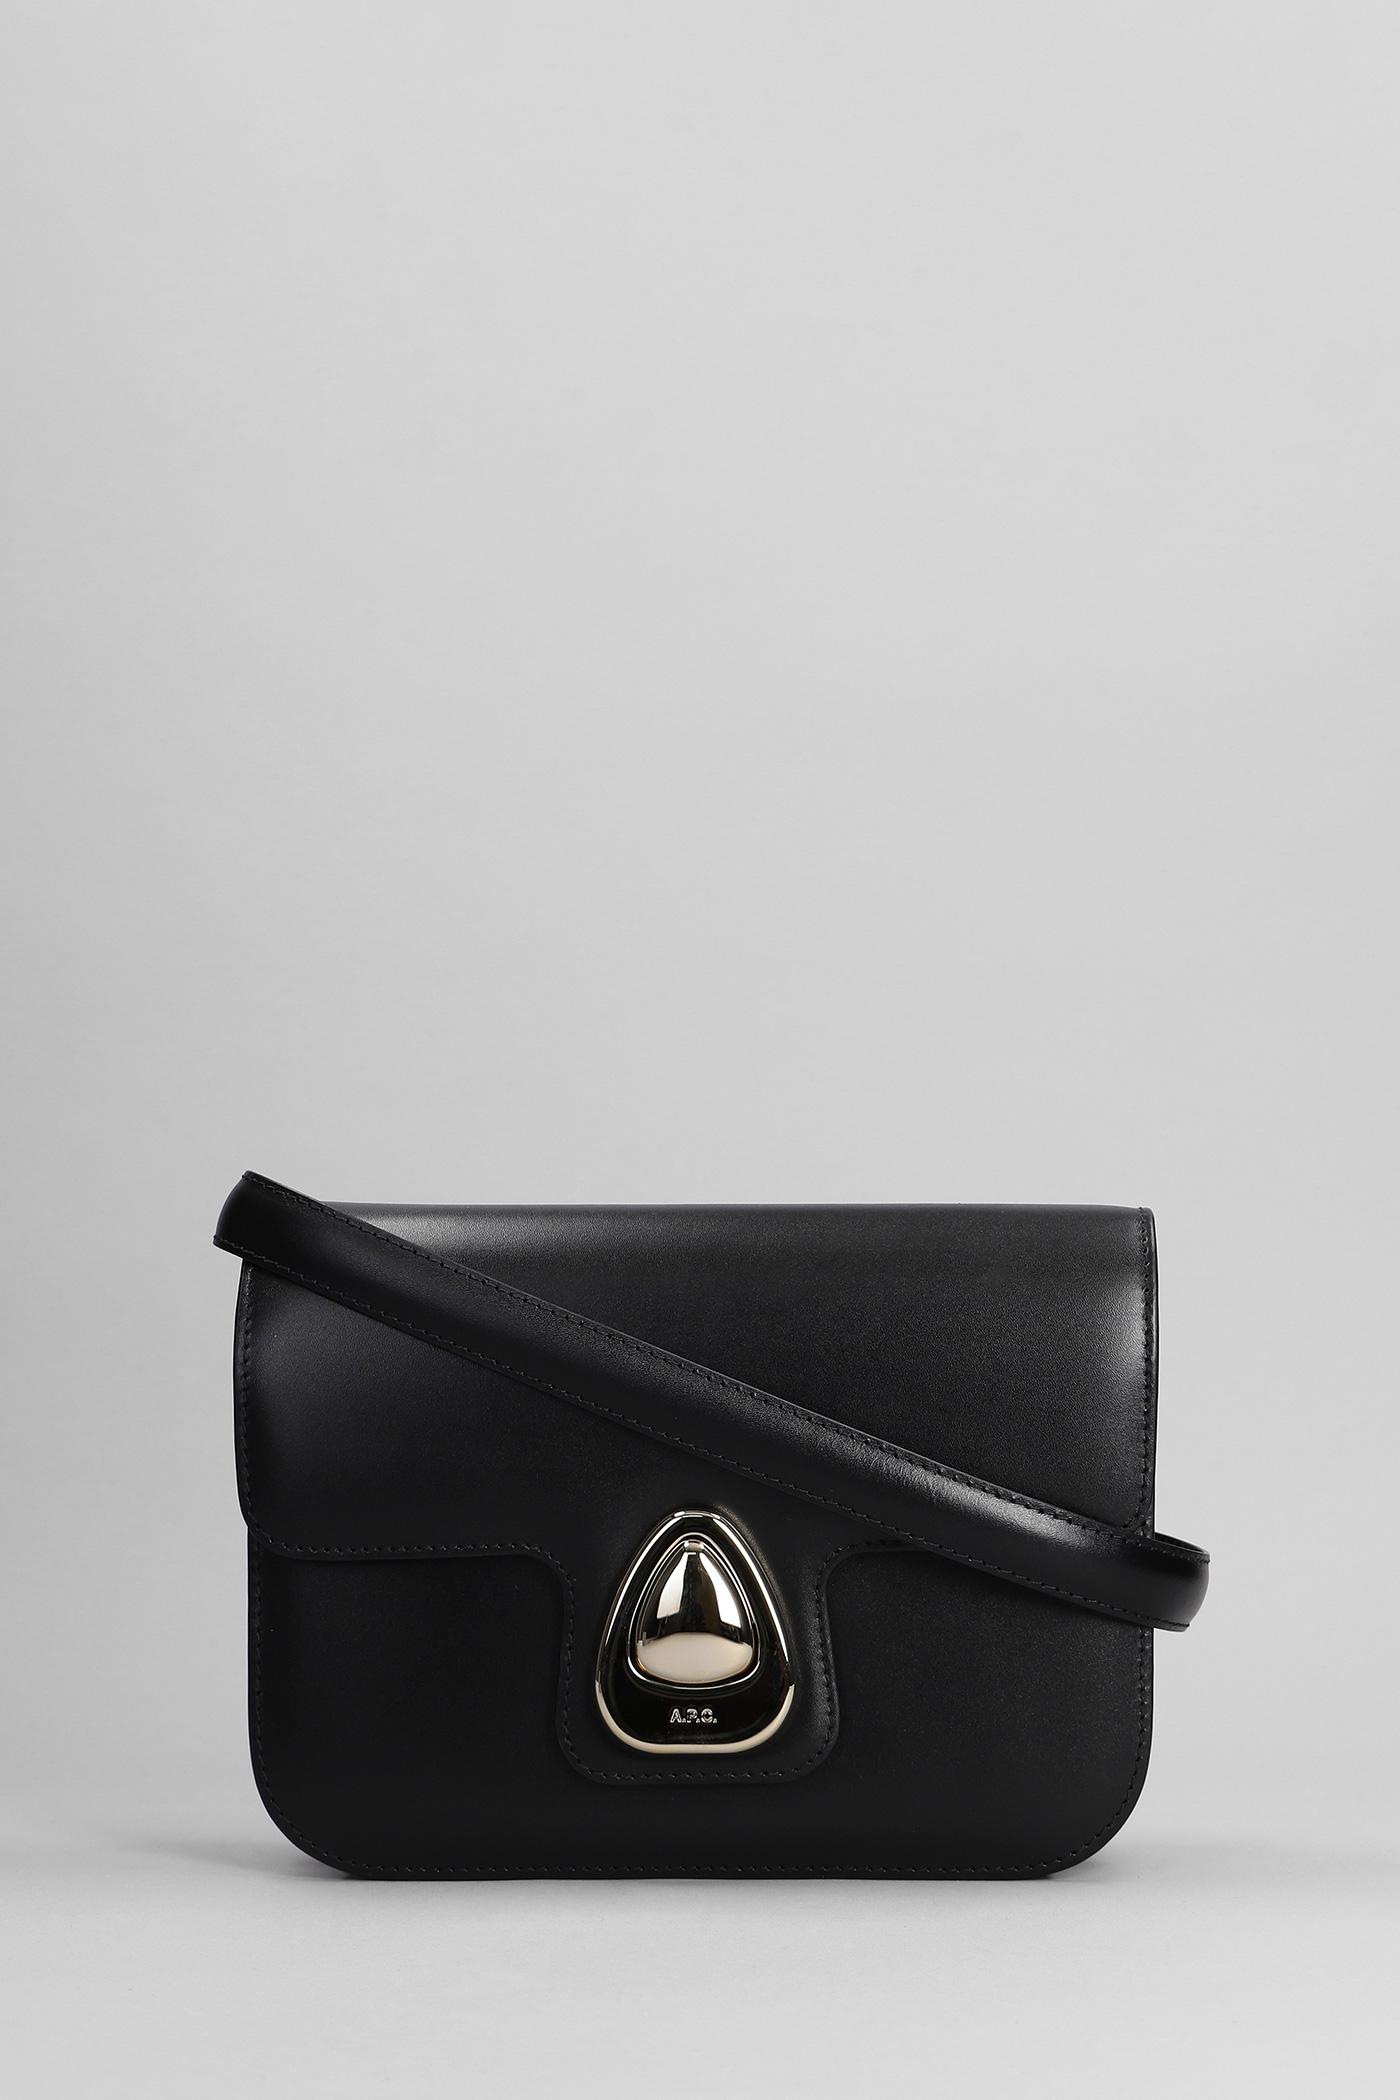 A.P.C. Astra Small Shoulder Bag In Black Leather in Gray | Lyst